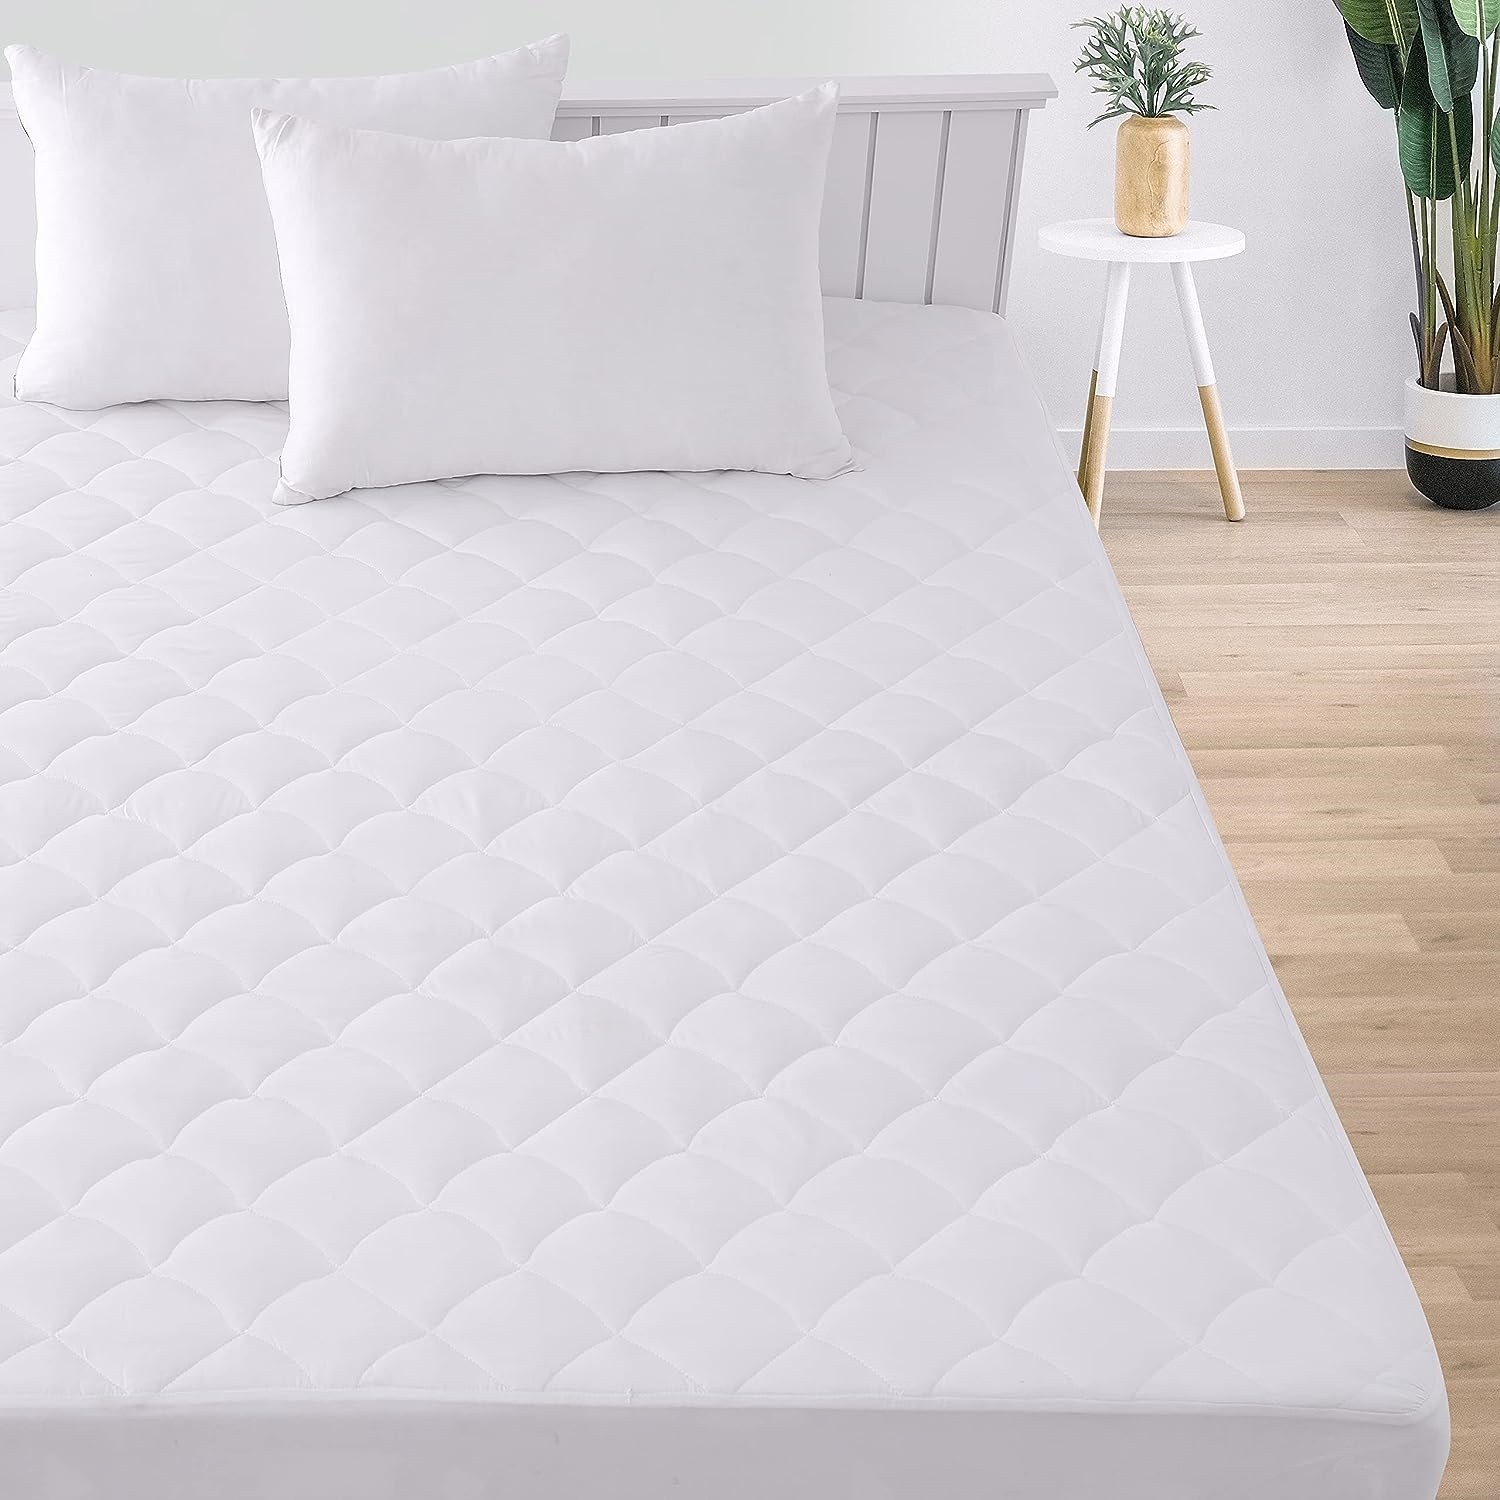 Hanna Kay Mattress Pad Review: Inexpensive Protection and Comfort